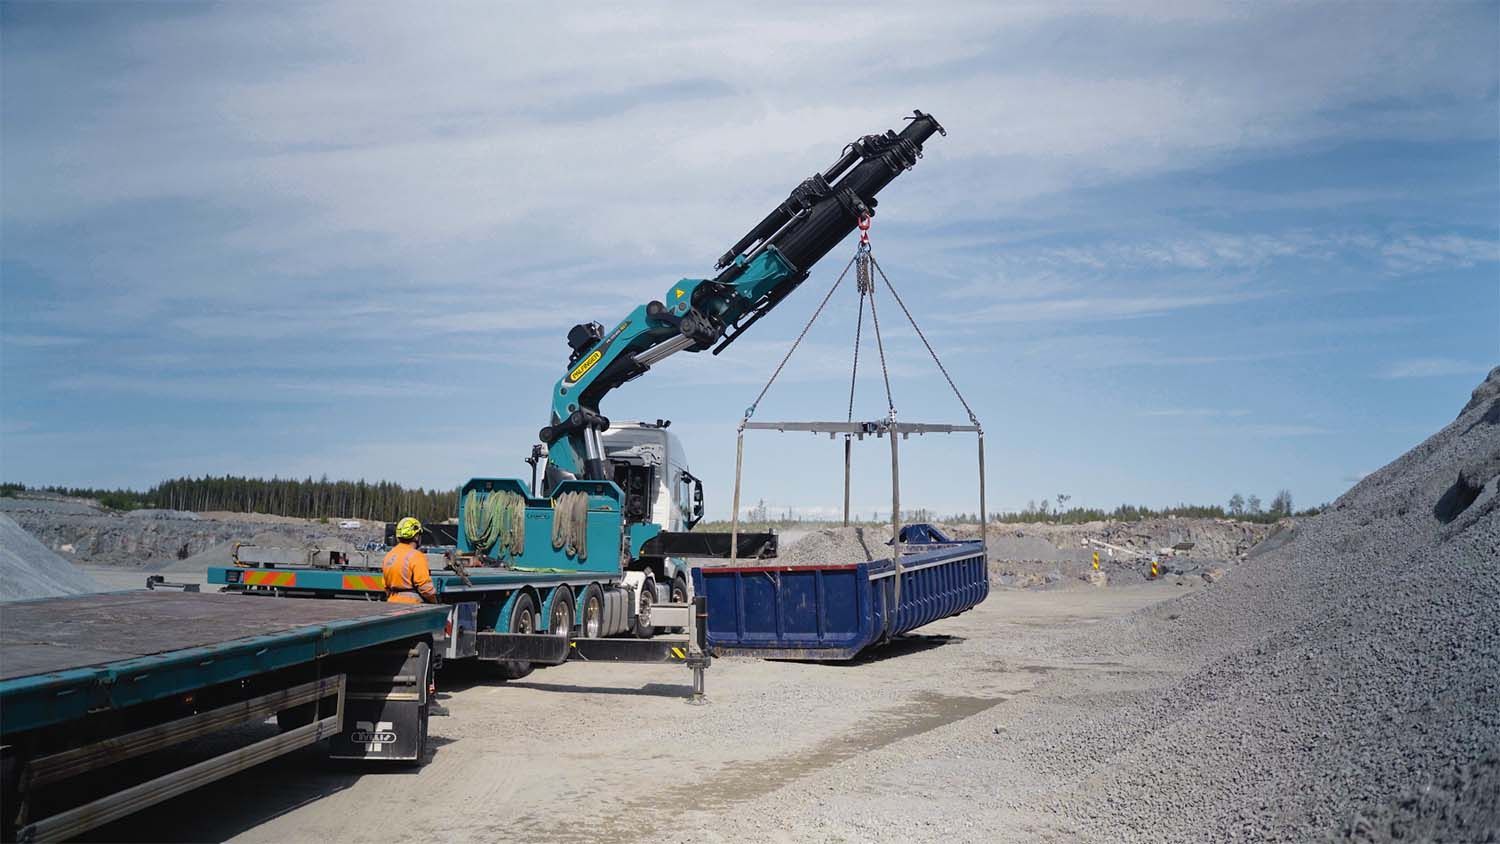 The Aluex18+ spreader beam is a lightweight, extendable lifting device made for loads up to 18 tons. It features a steel center with interchangeable aluminum arms. The beam can be adjusted from 2.51 meters to 5.23 meters and is designed to fit perfectly on the back of a crane truck when contracted.